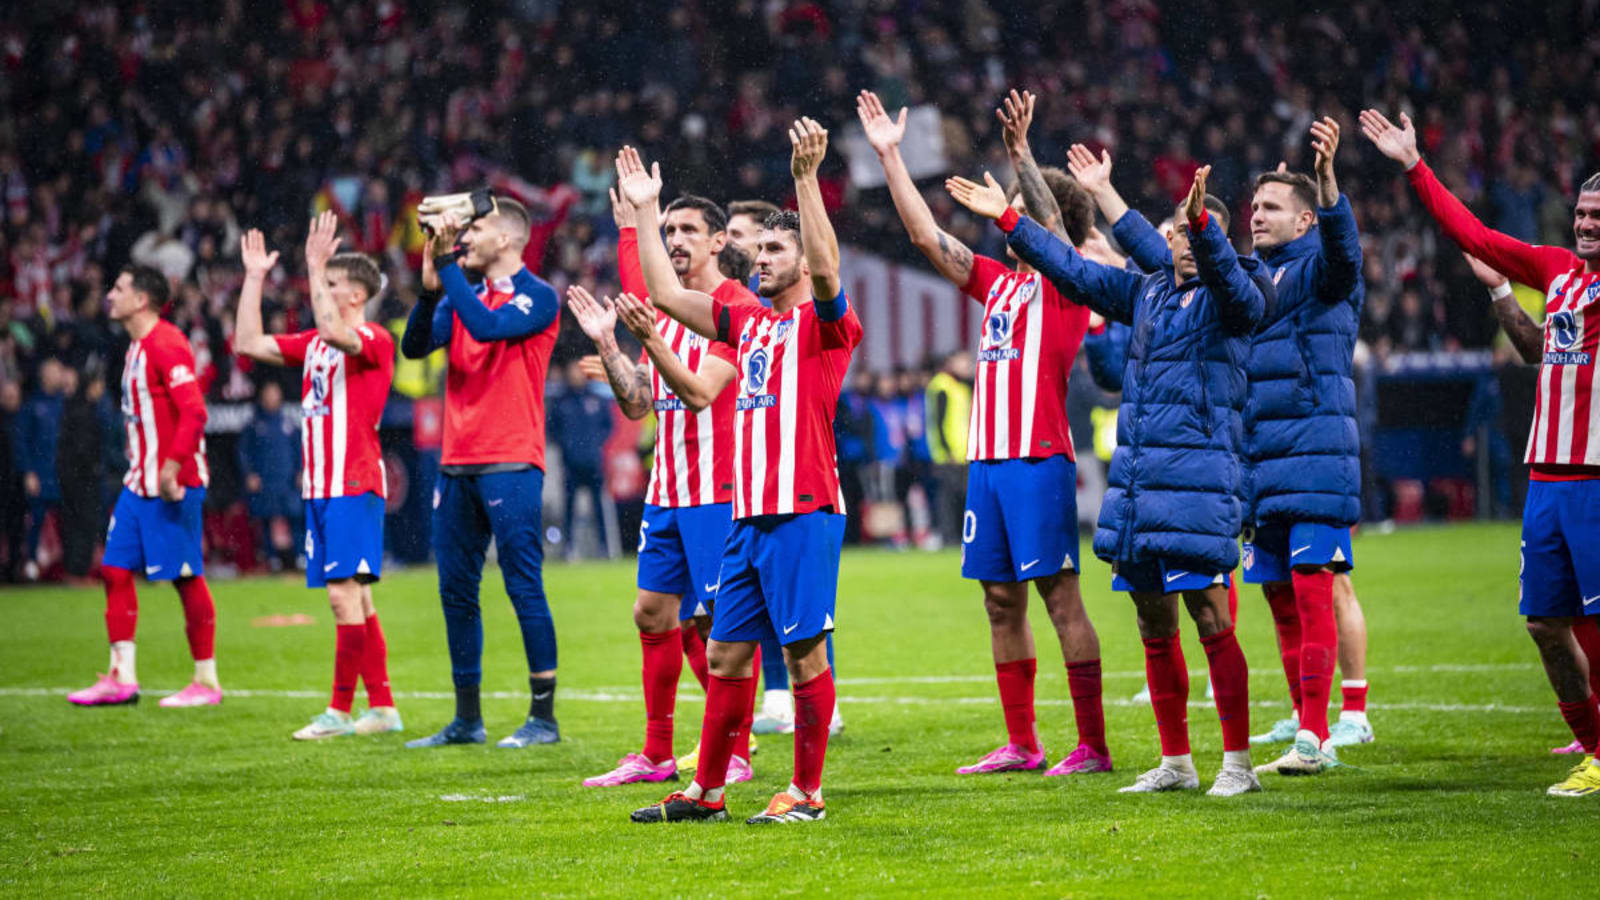 Atletico Beat Real In Six-Goal Madrid Derby To Reach Copa Del Rey Quarter-Finals